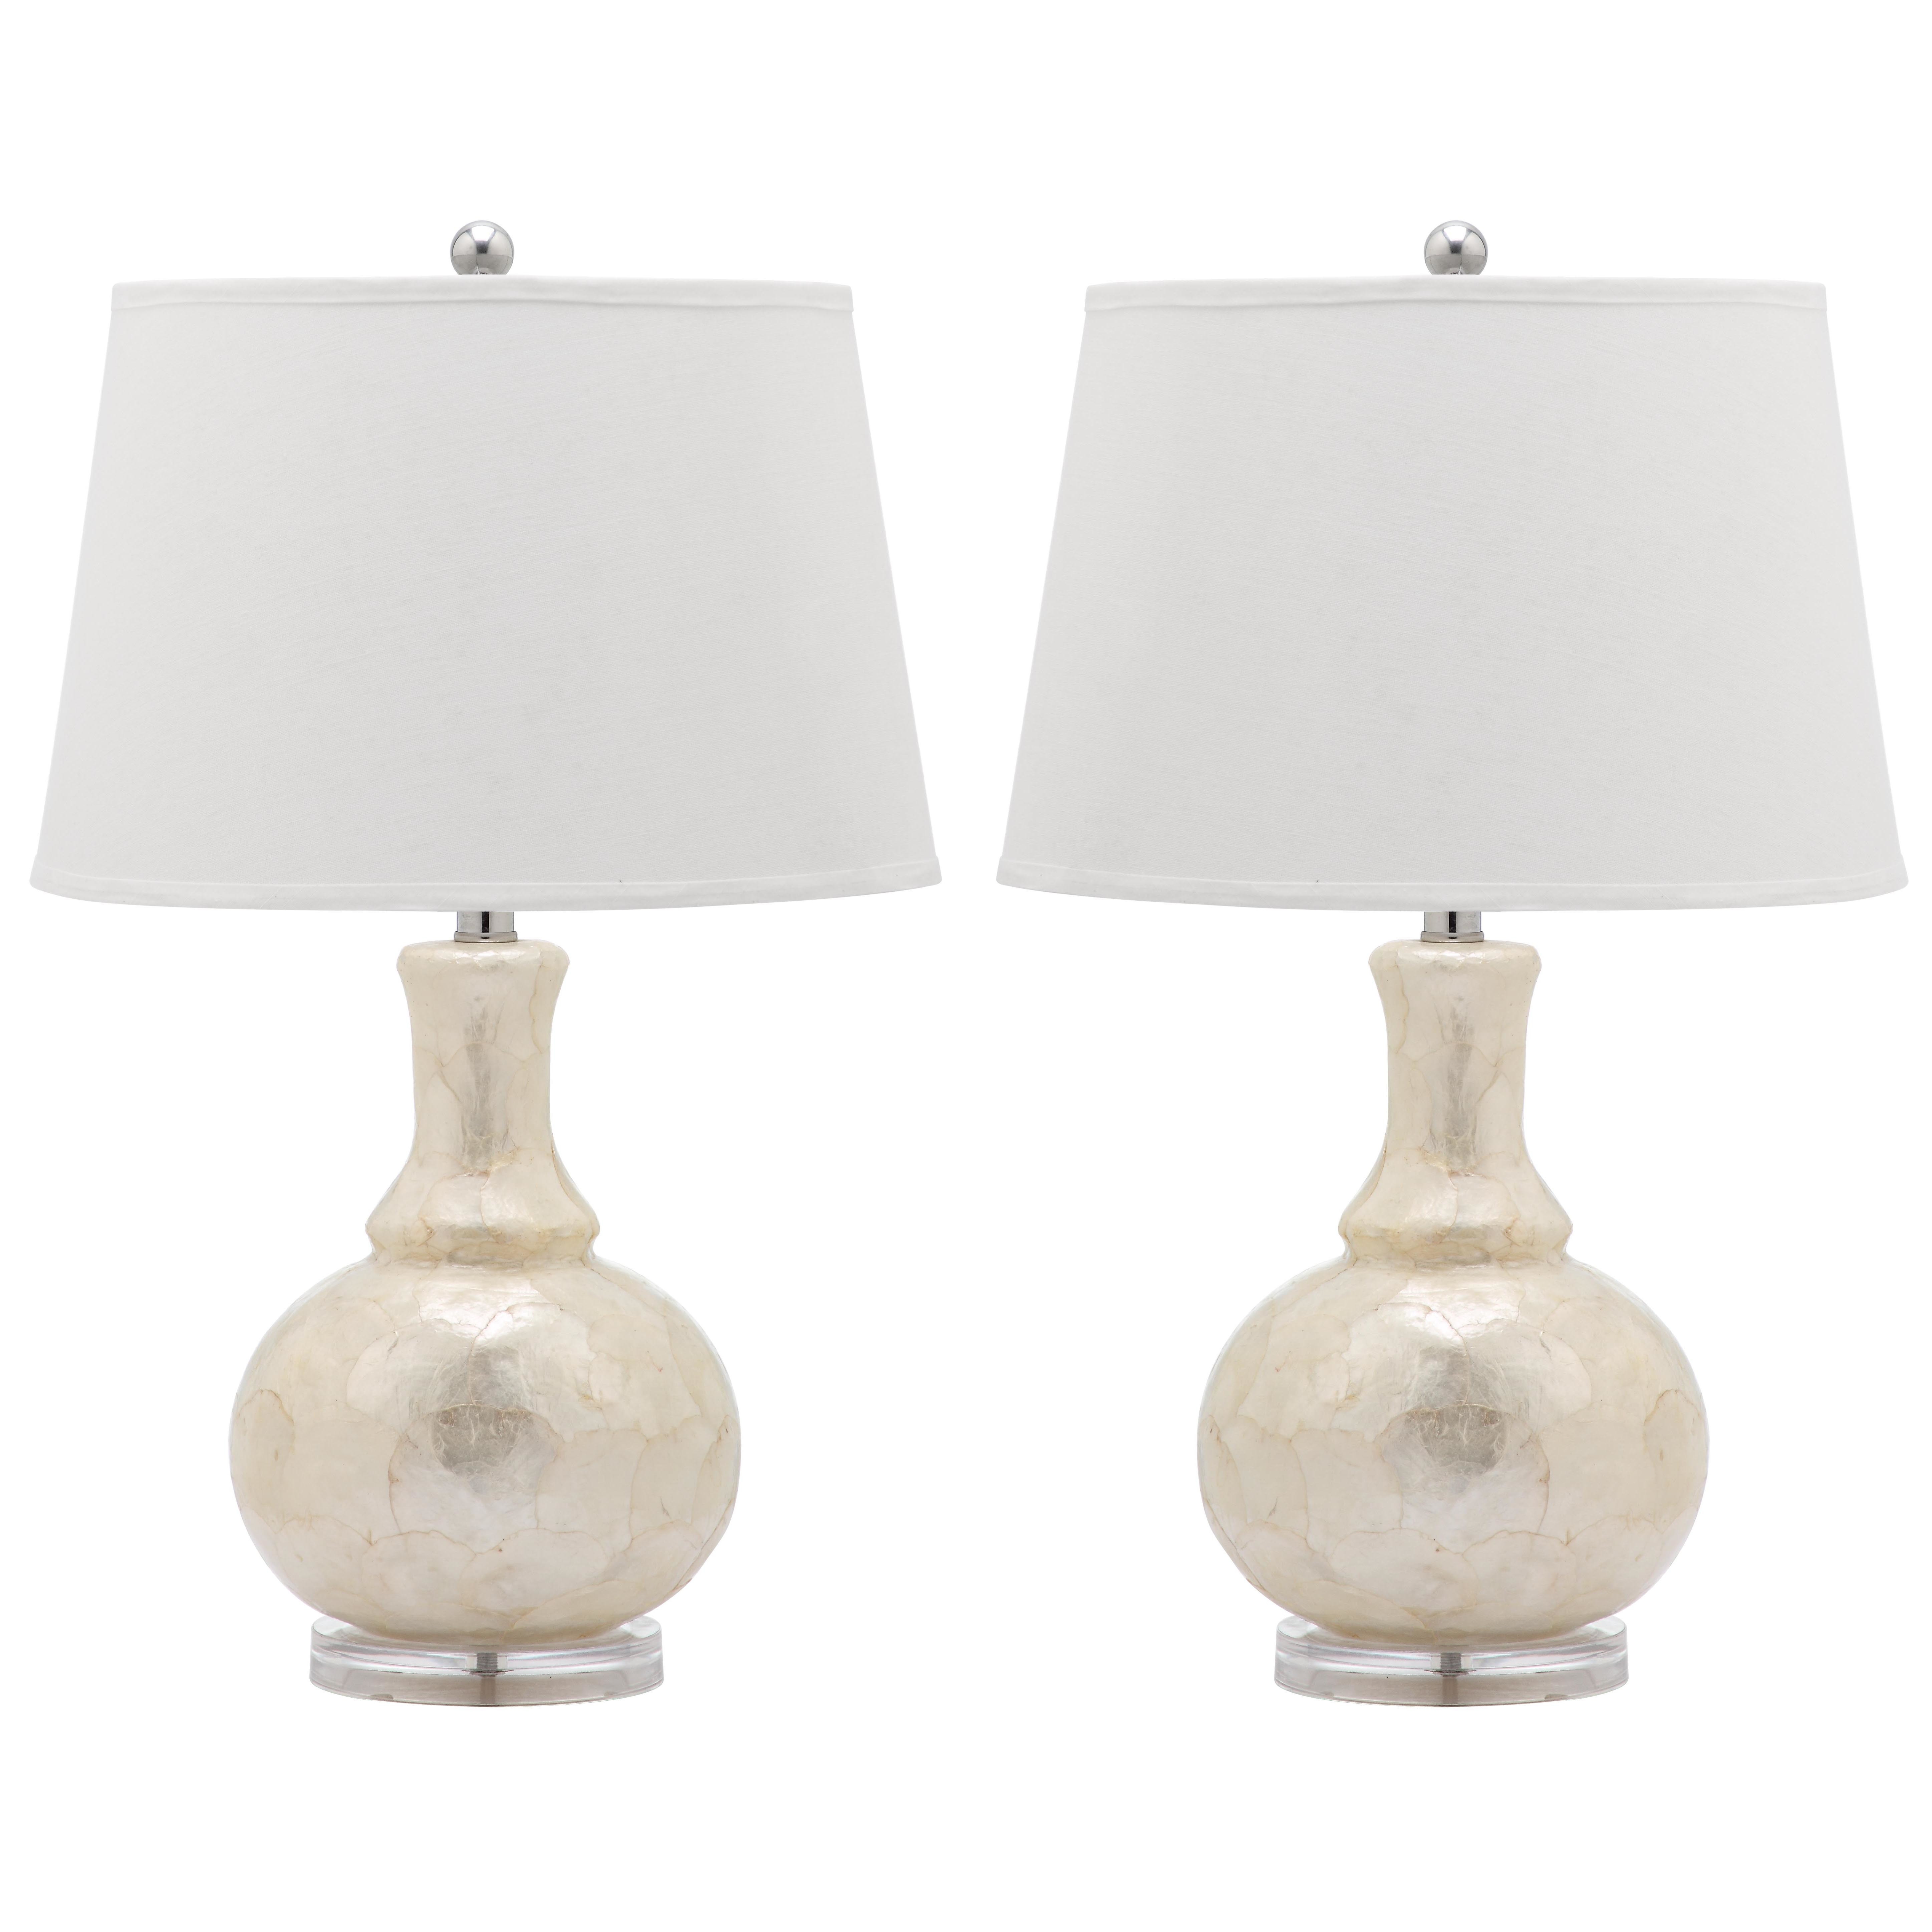 Shelley Gourd 24.75" H Table Lamp with Empire Shade - Image 0